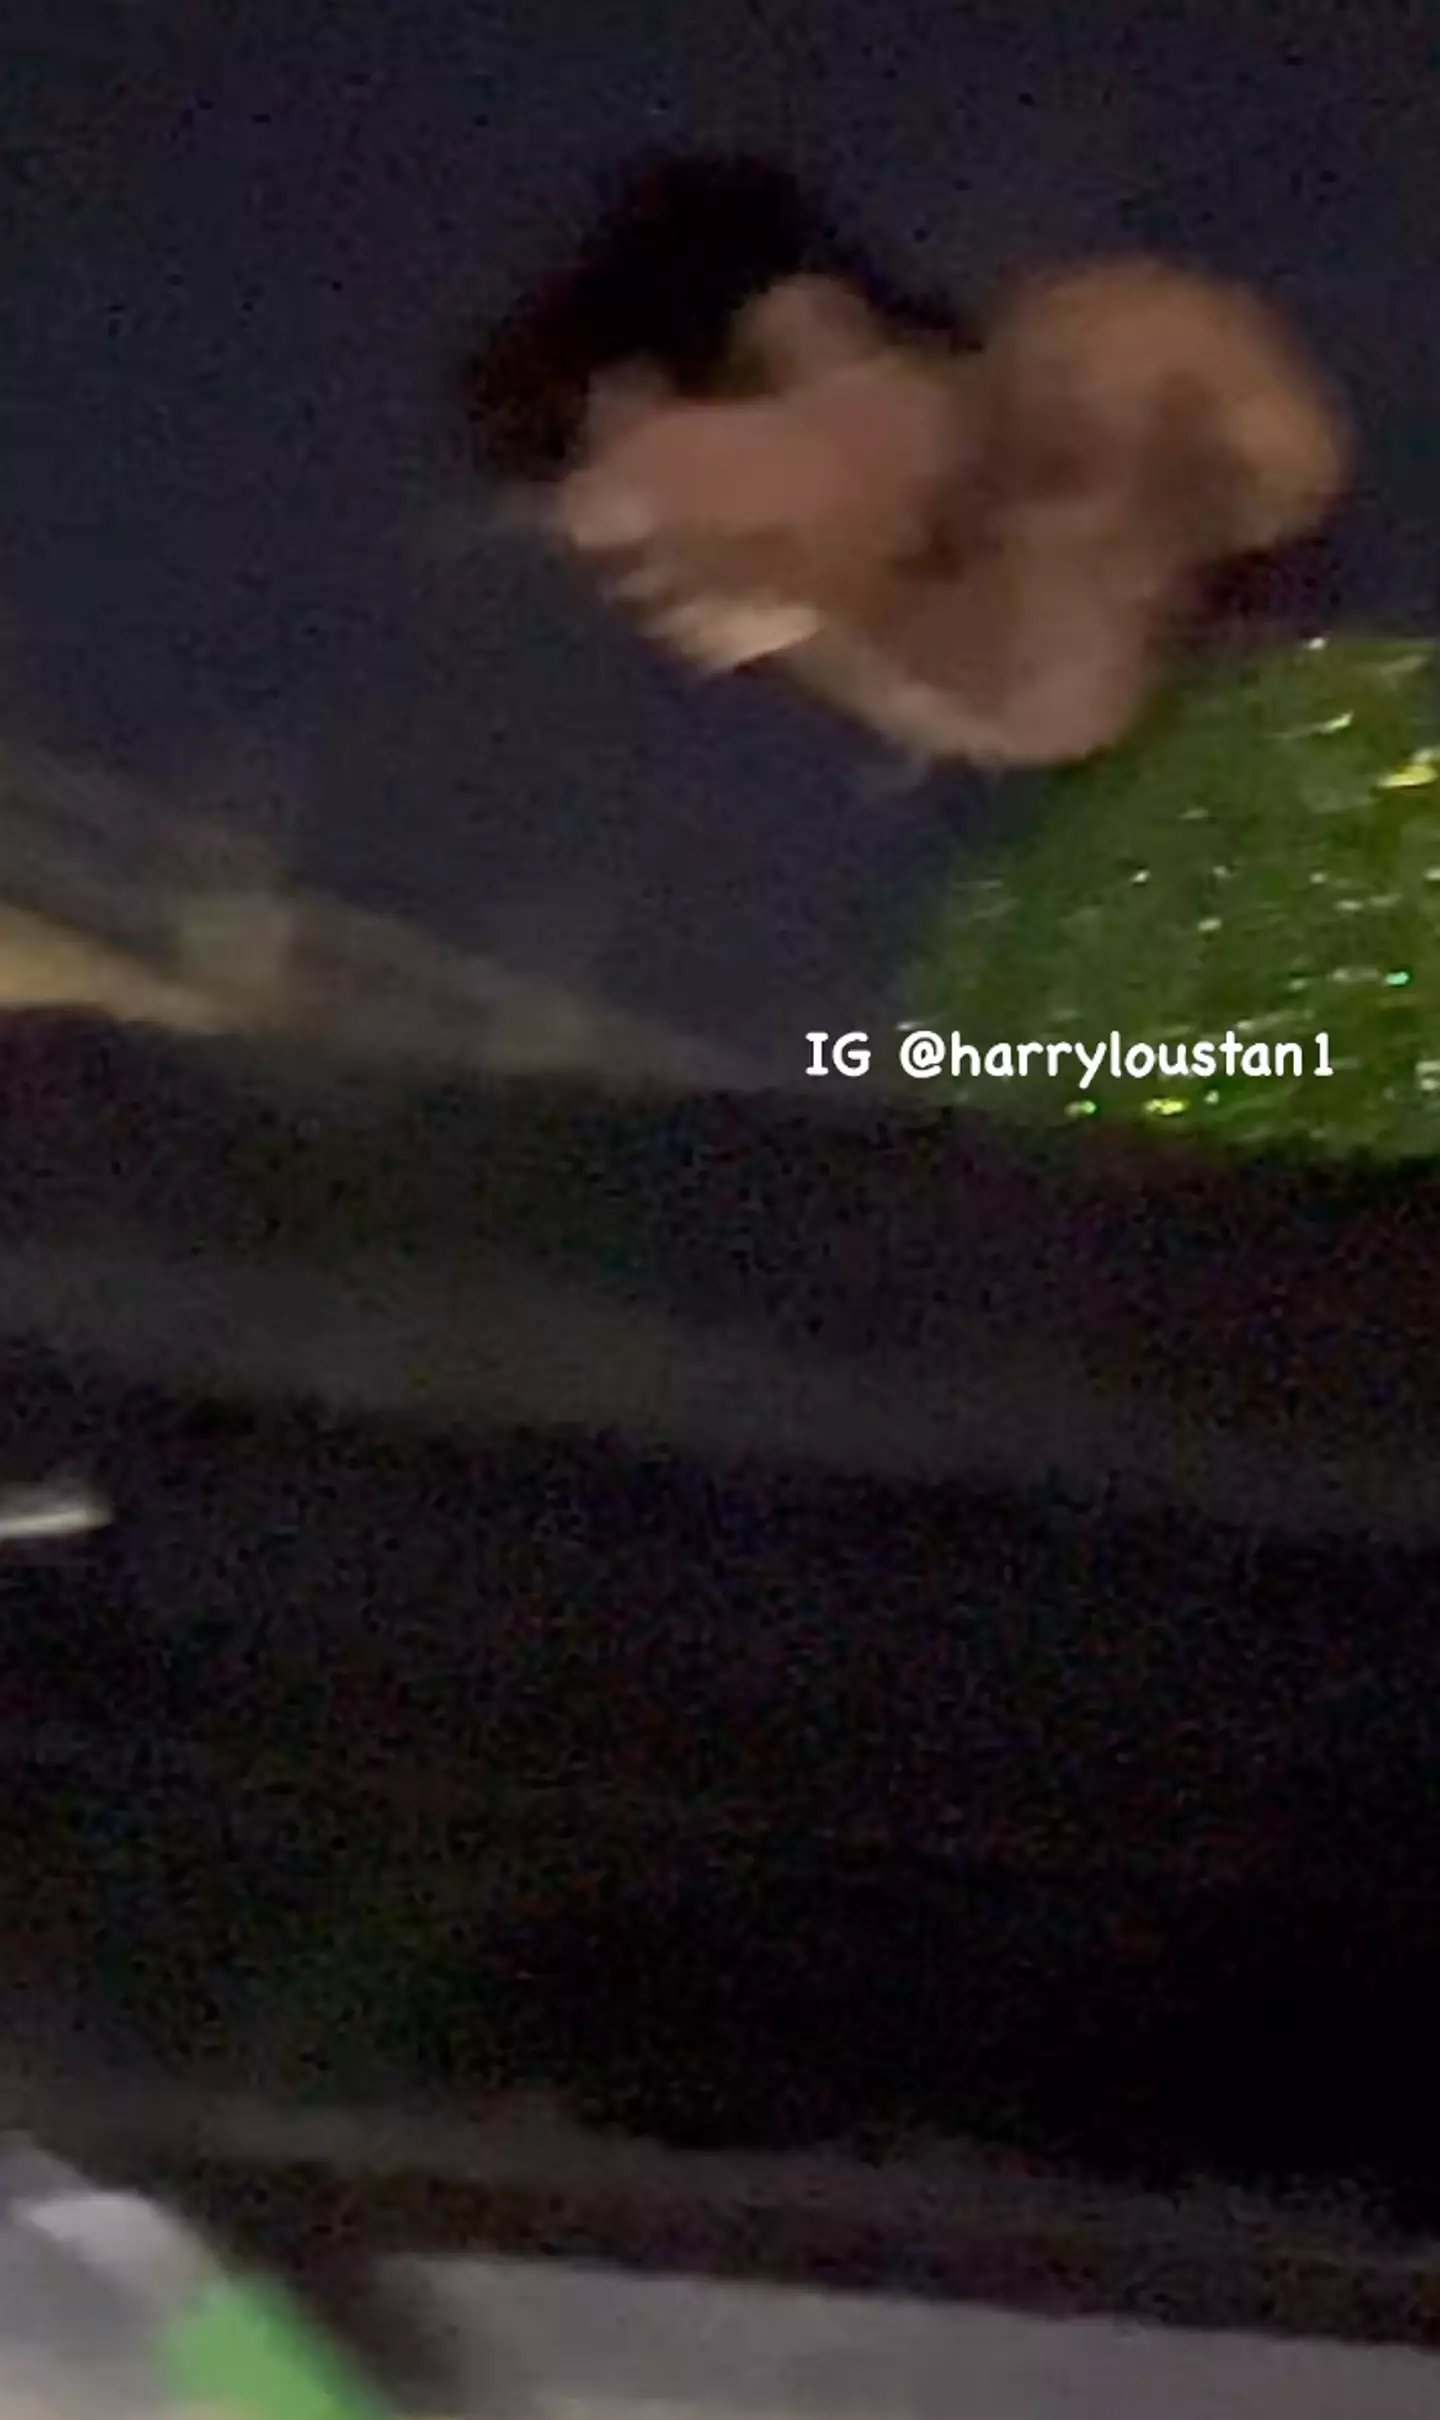 Harry Styles appeared to be hit in the eye by an object.